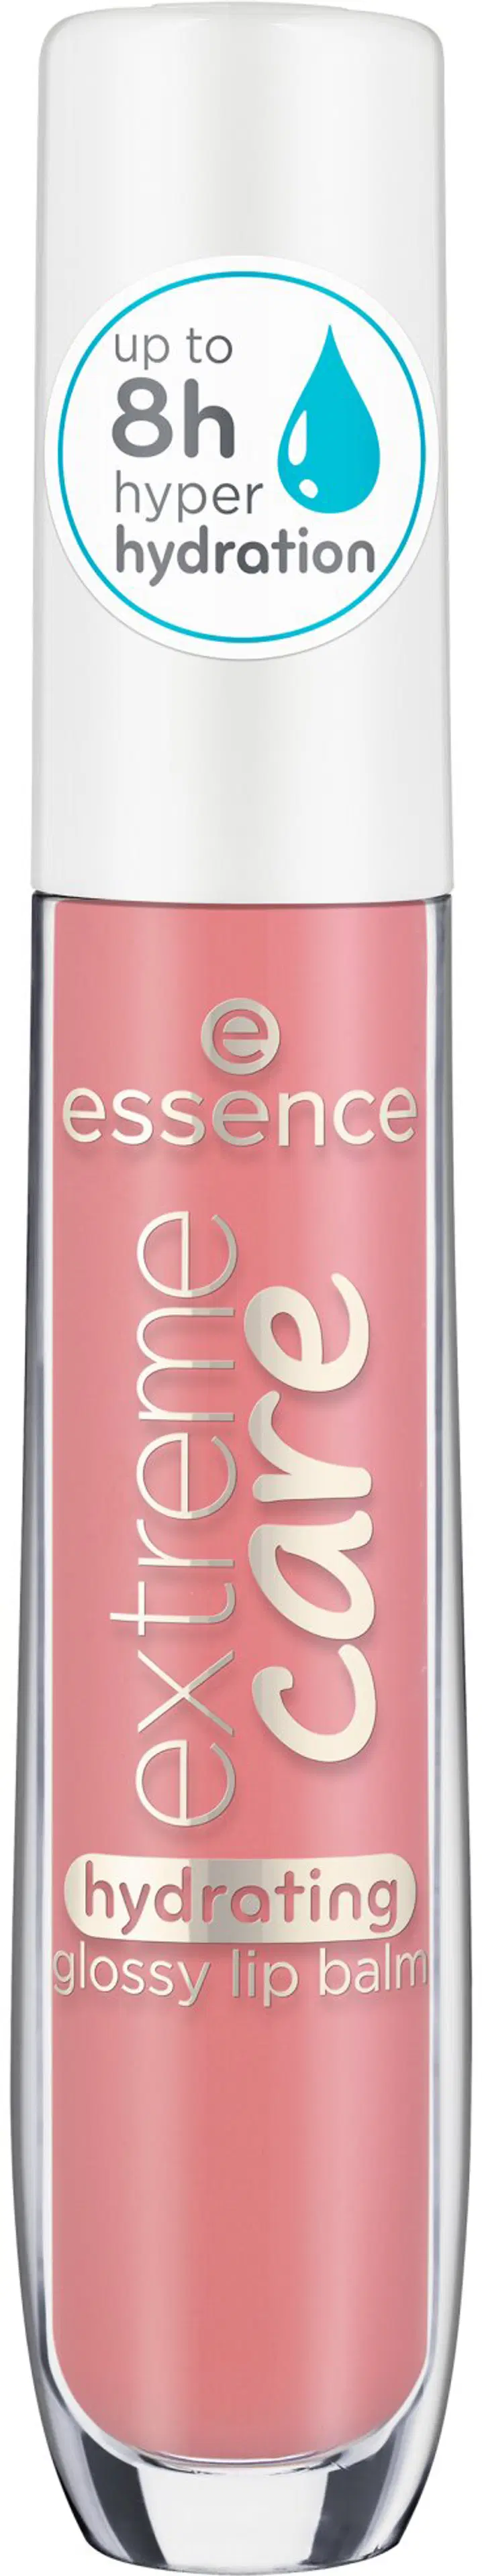 essence extreme care hydrating glossy lip balm huulivoide 5 ml